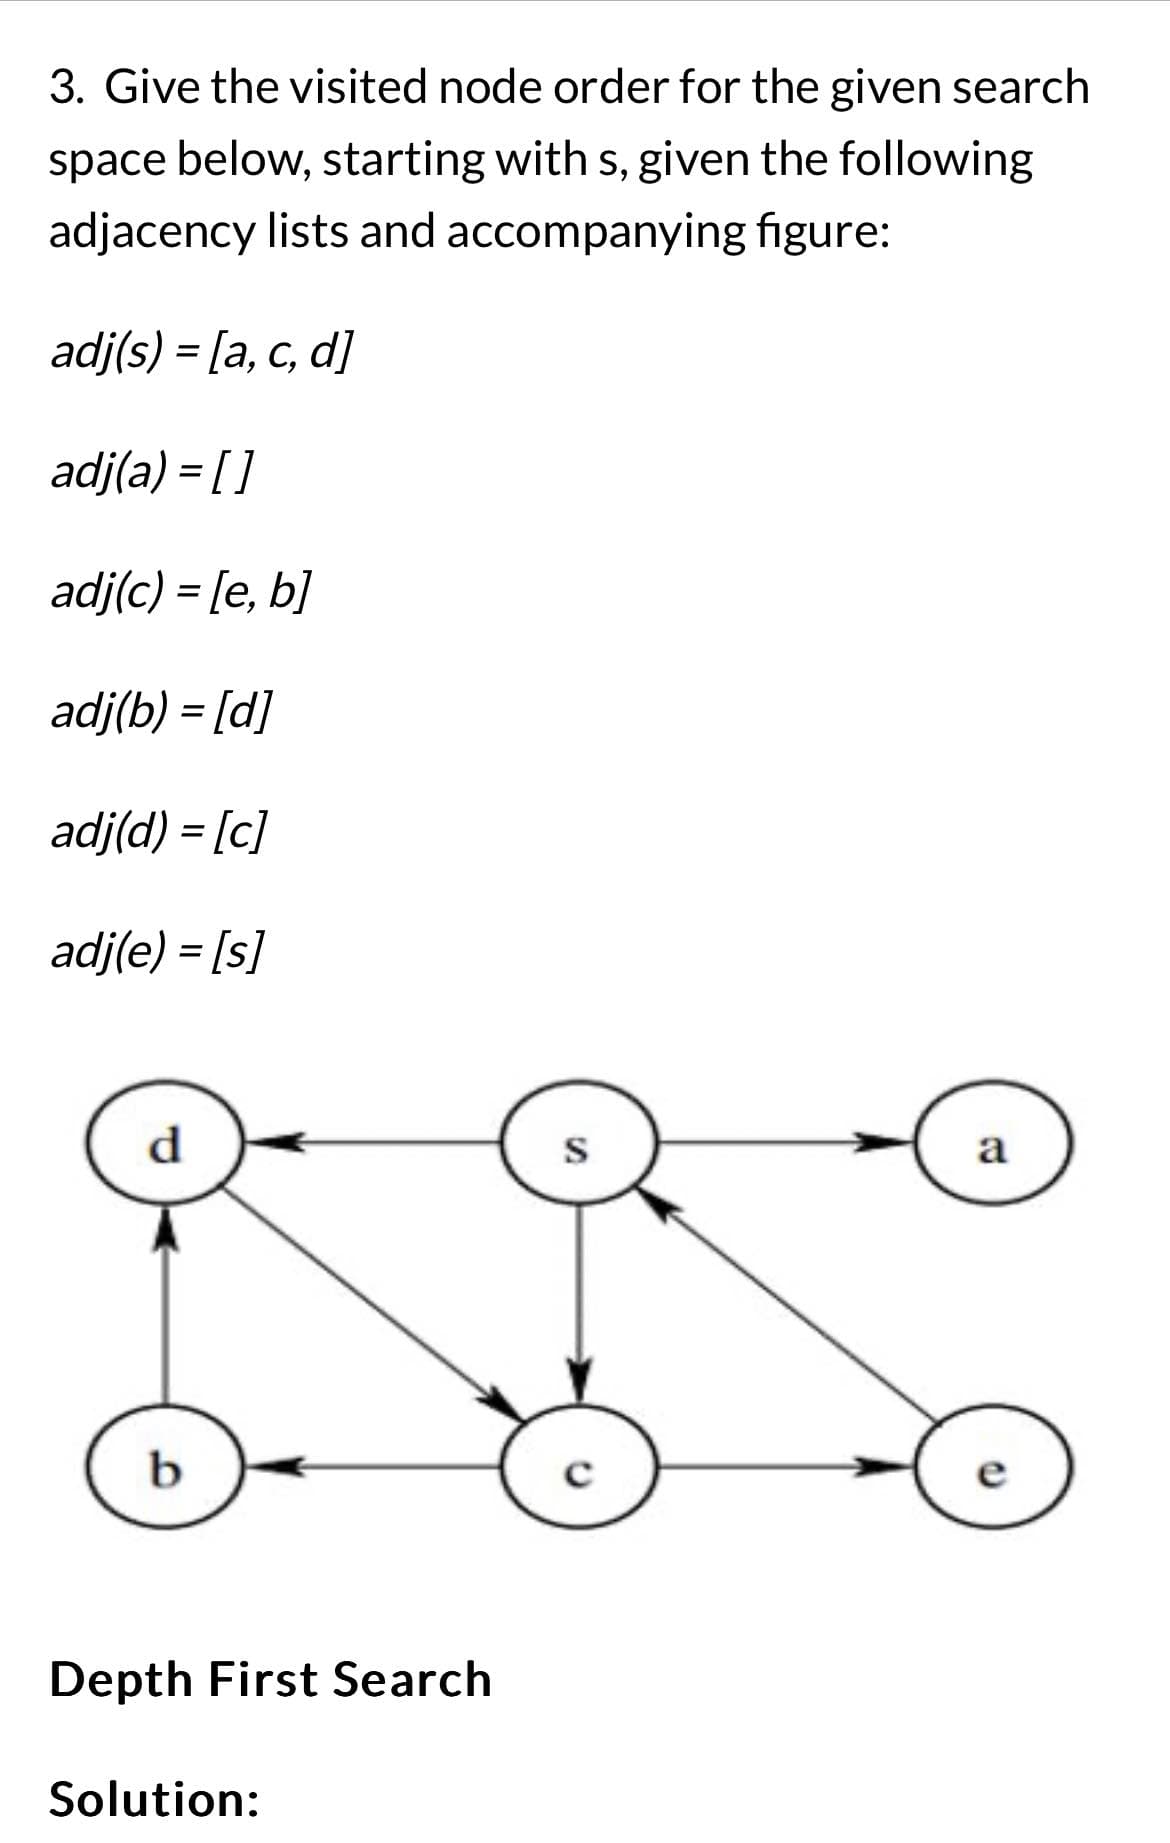 3. Give the visited node order for the given search
space below, starting with s, given the following
adjacency lists and accompanying figure:
adj(s) = [a, c, d]
adj(a) = []
adj(c) = [e, b]
adj(b) = [d]
adj(d) = [c]
adj(e) = [s]
b
Depth First Search
Solution:
S
с
a